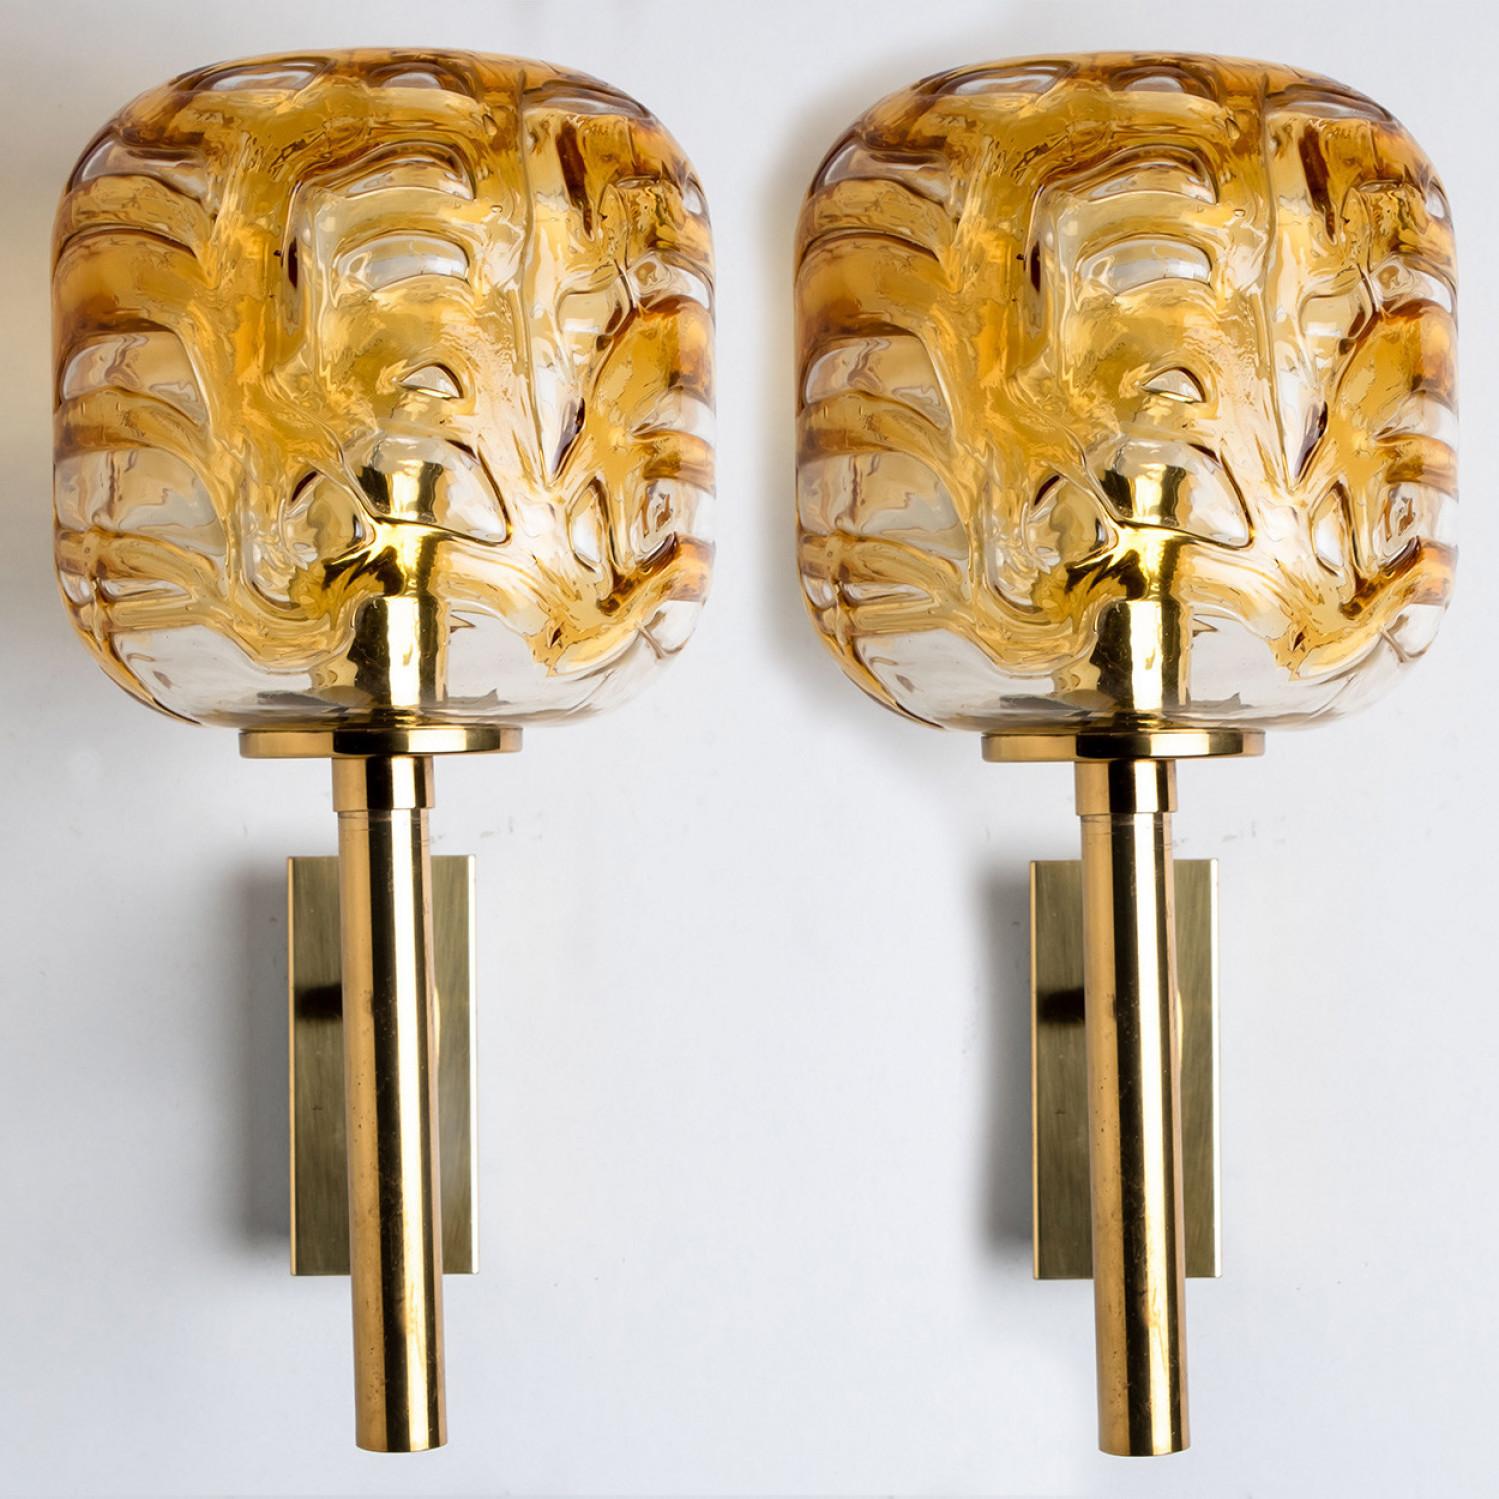 Pair of  Doria wall lights (in collaboration with Murano) in the style of Venini, manufactured, circa 1960.
High-end thick Murano crystal glass shade made out of overlay yellow glass, applied in irregular swirls. Mind blowing lighting effect when